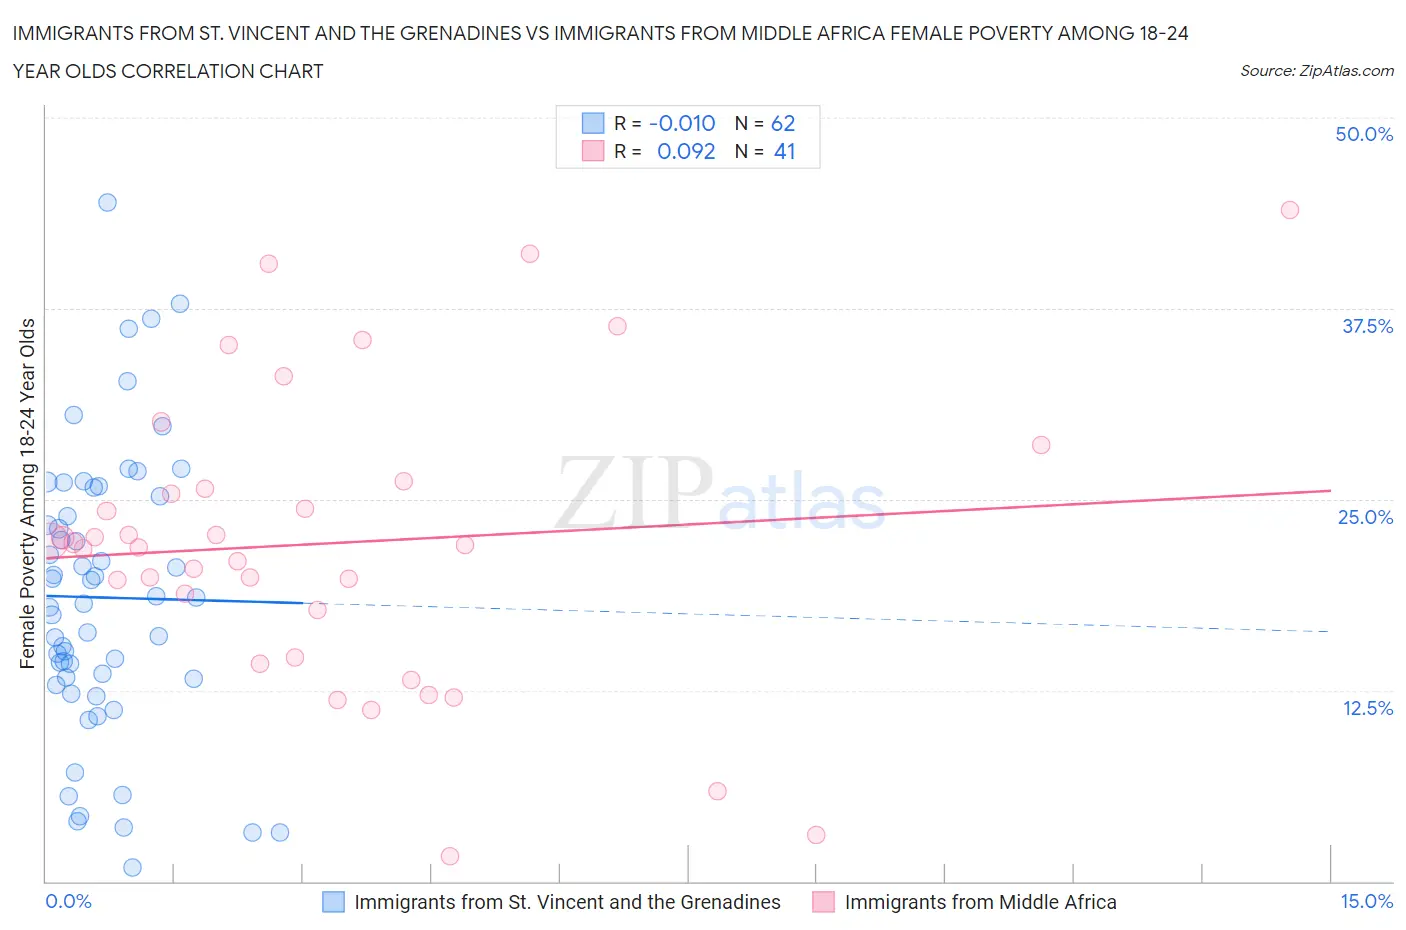 Immigrants from St. Vincent and the Grenadines vs Immigrants from Middle Africa Female Poverty Among 18-24 Year Olds